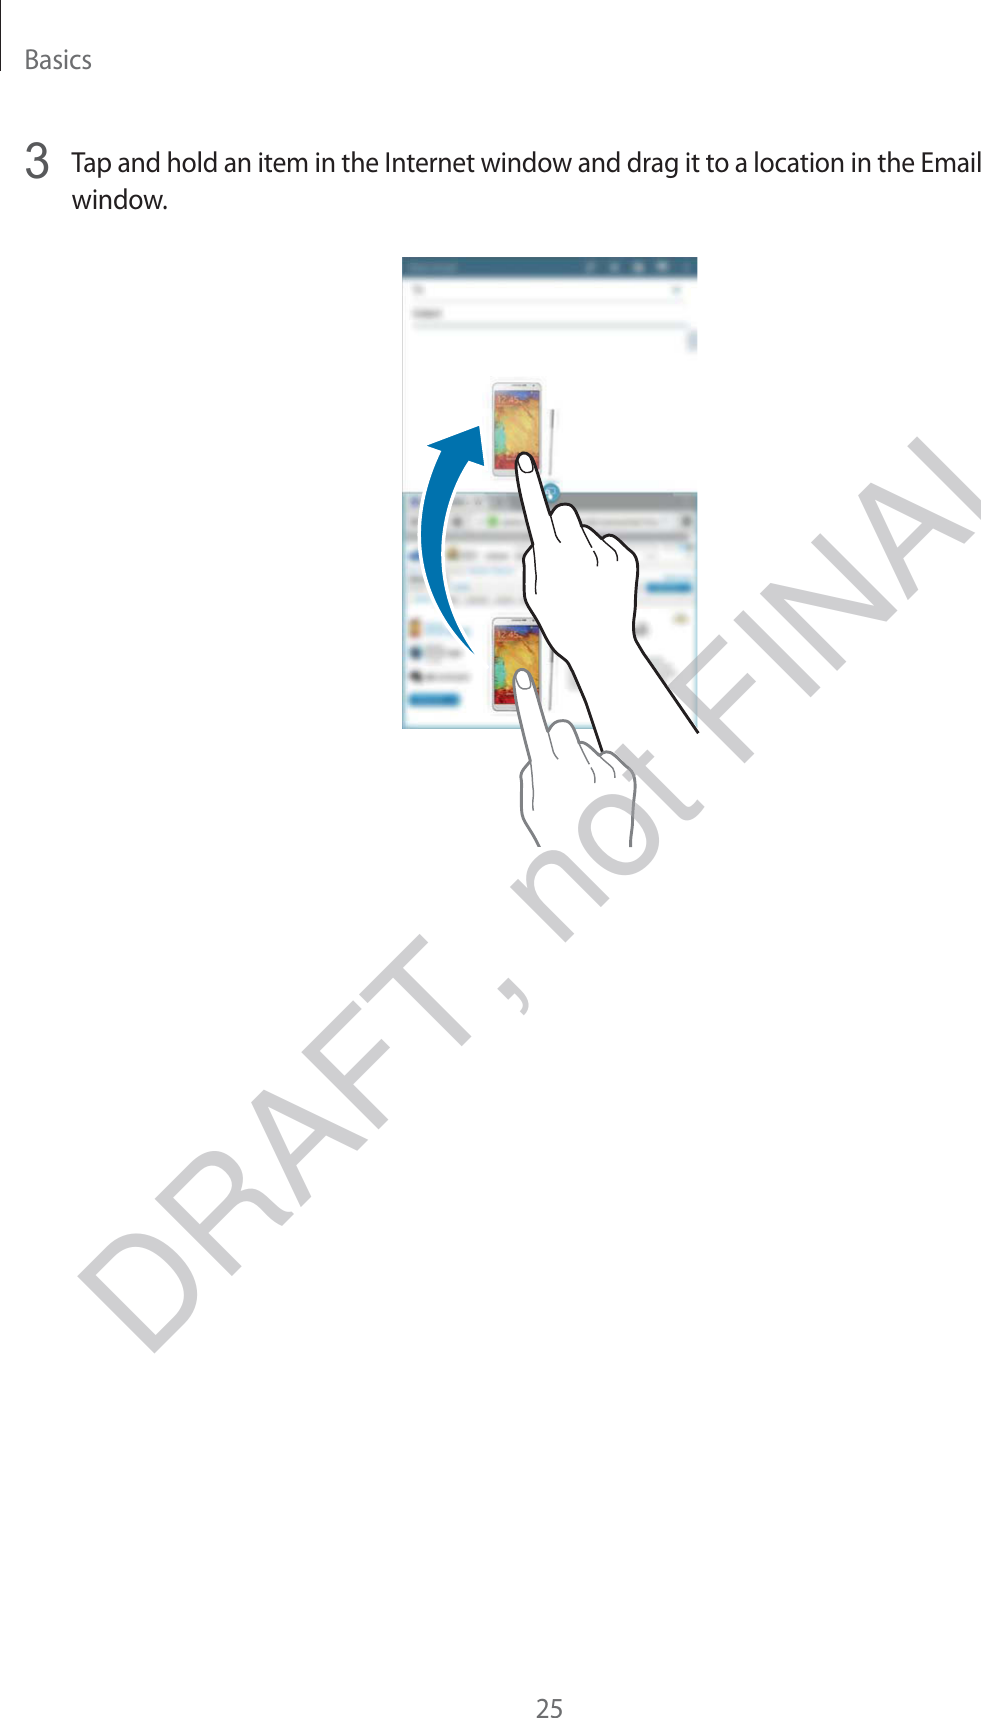 Basics253  Tap and hold an item in the Internet window and drag it to a location in the Email window.DRAFT, not FINAL